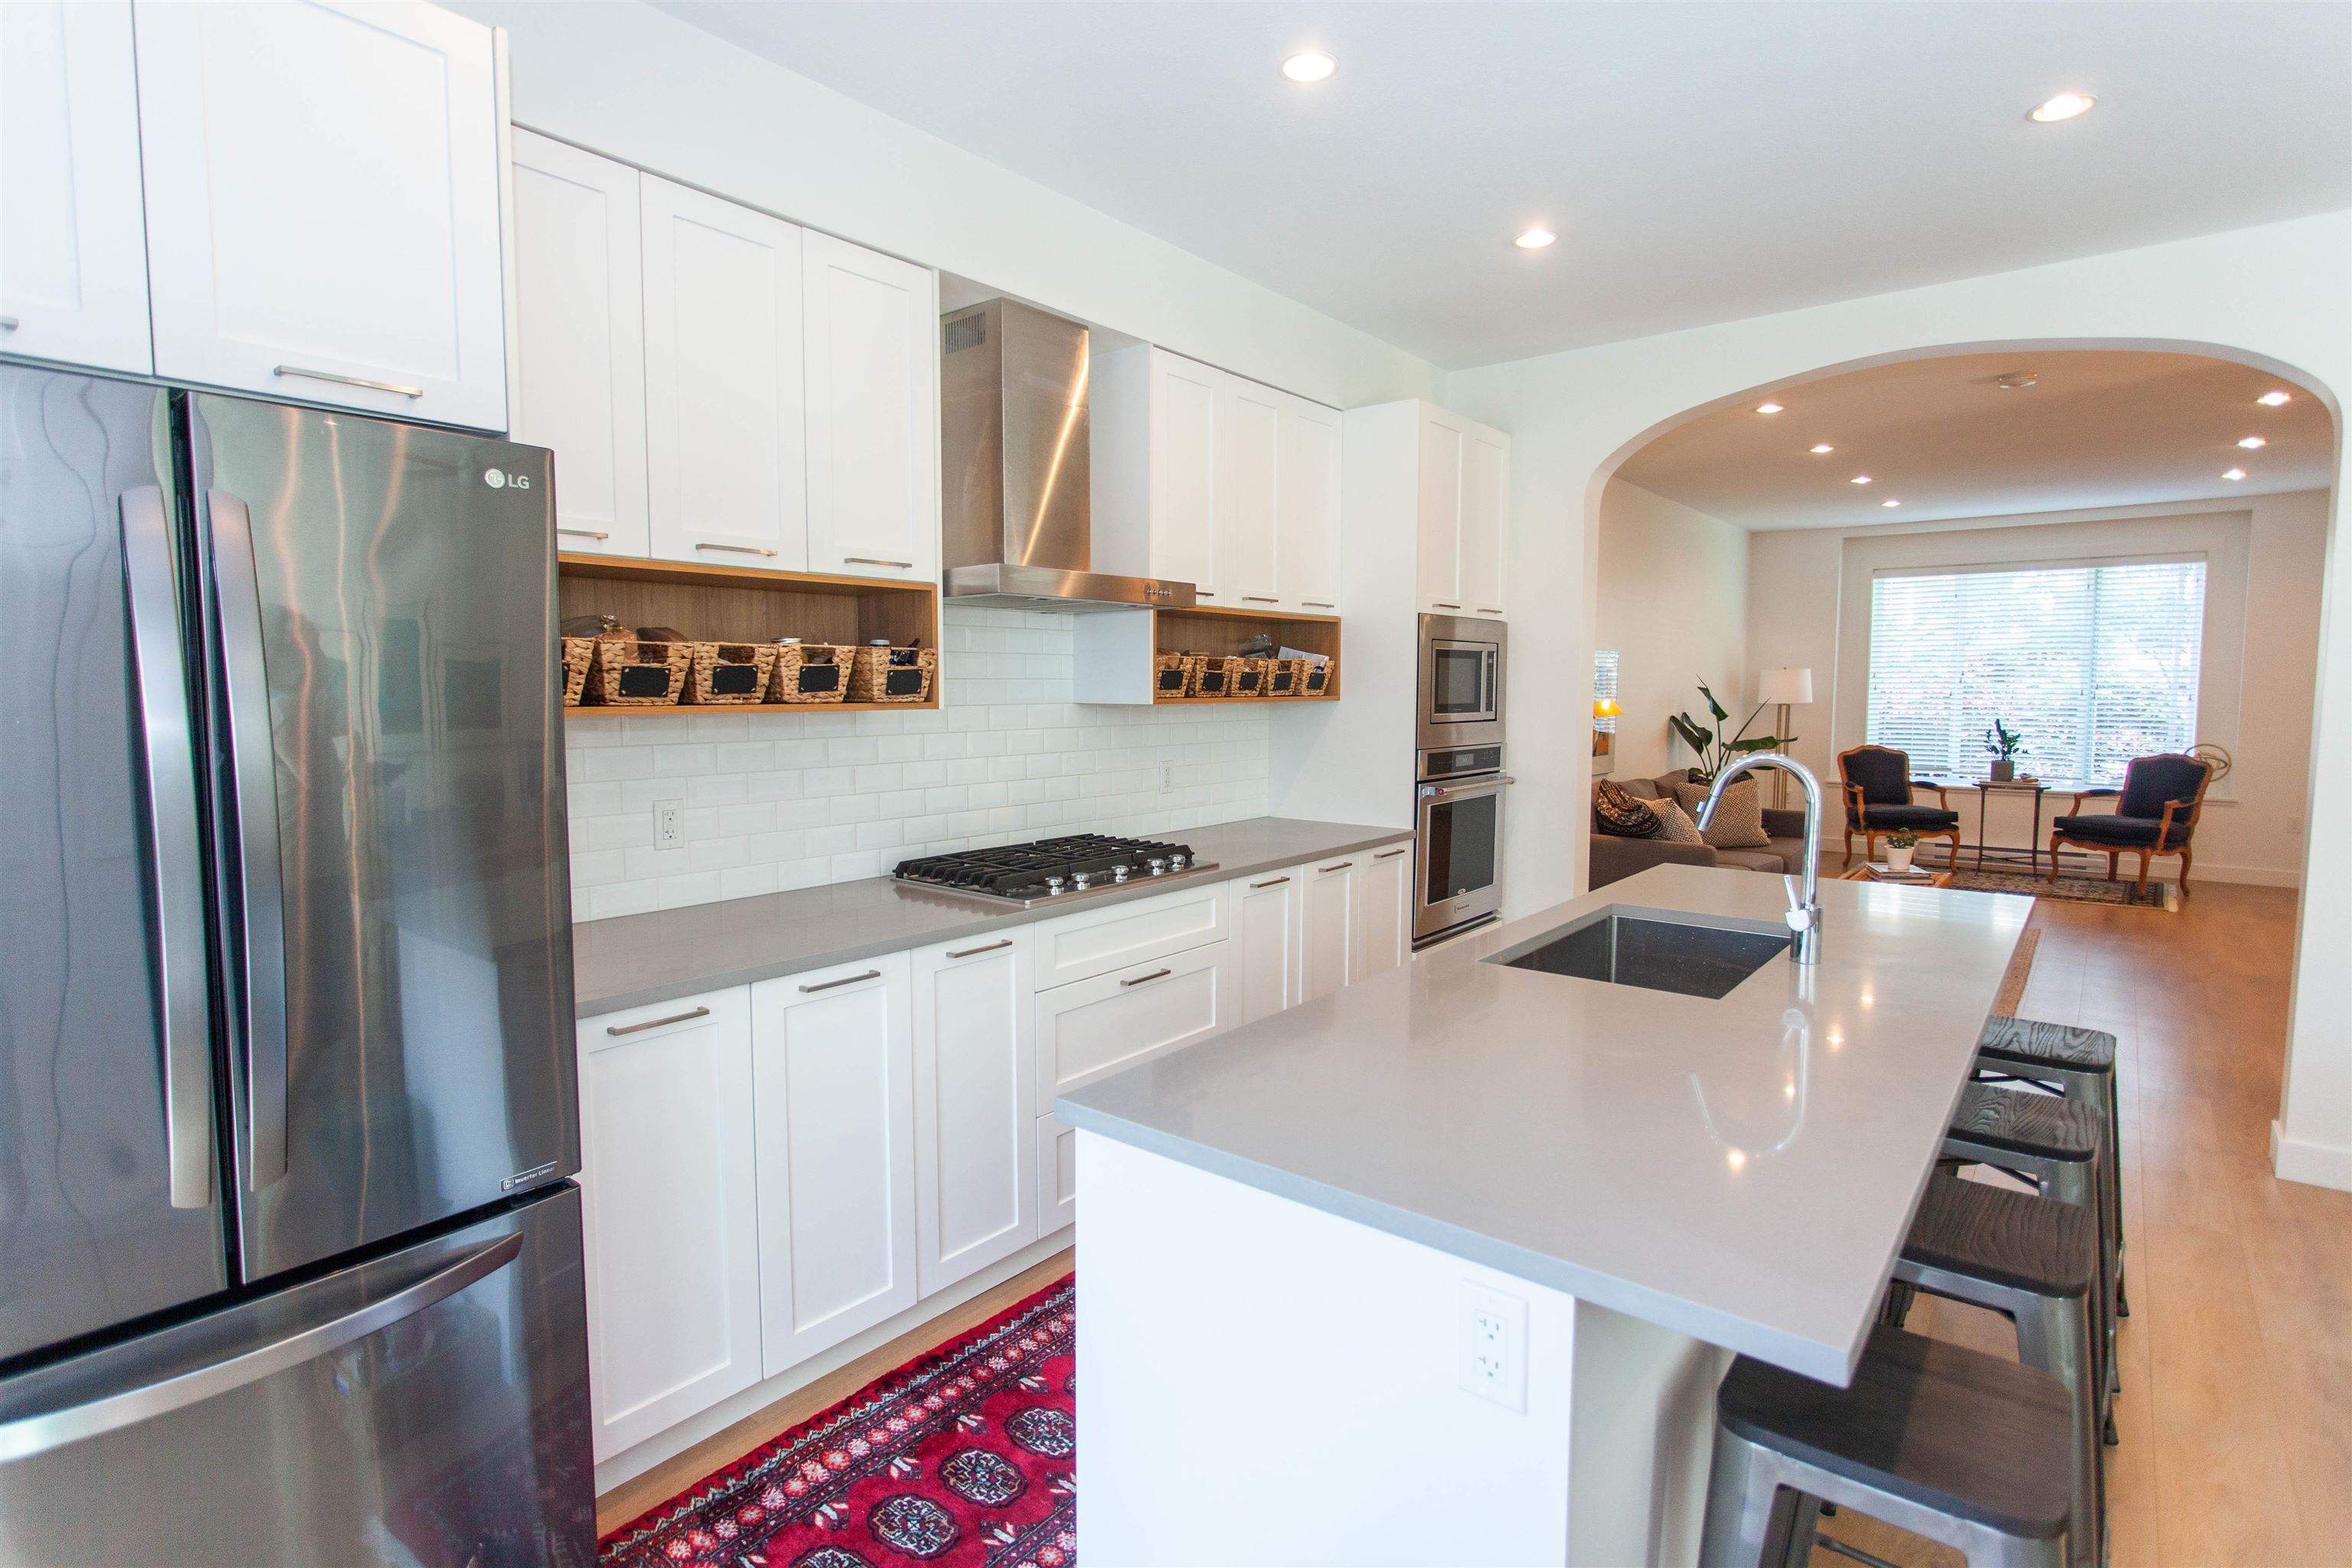 New property listed in Pacific Douglas, South Surrey White Rock